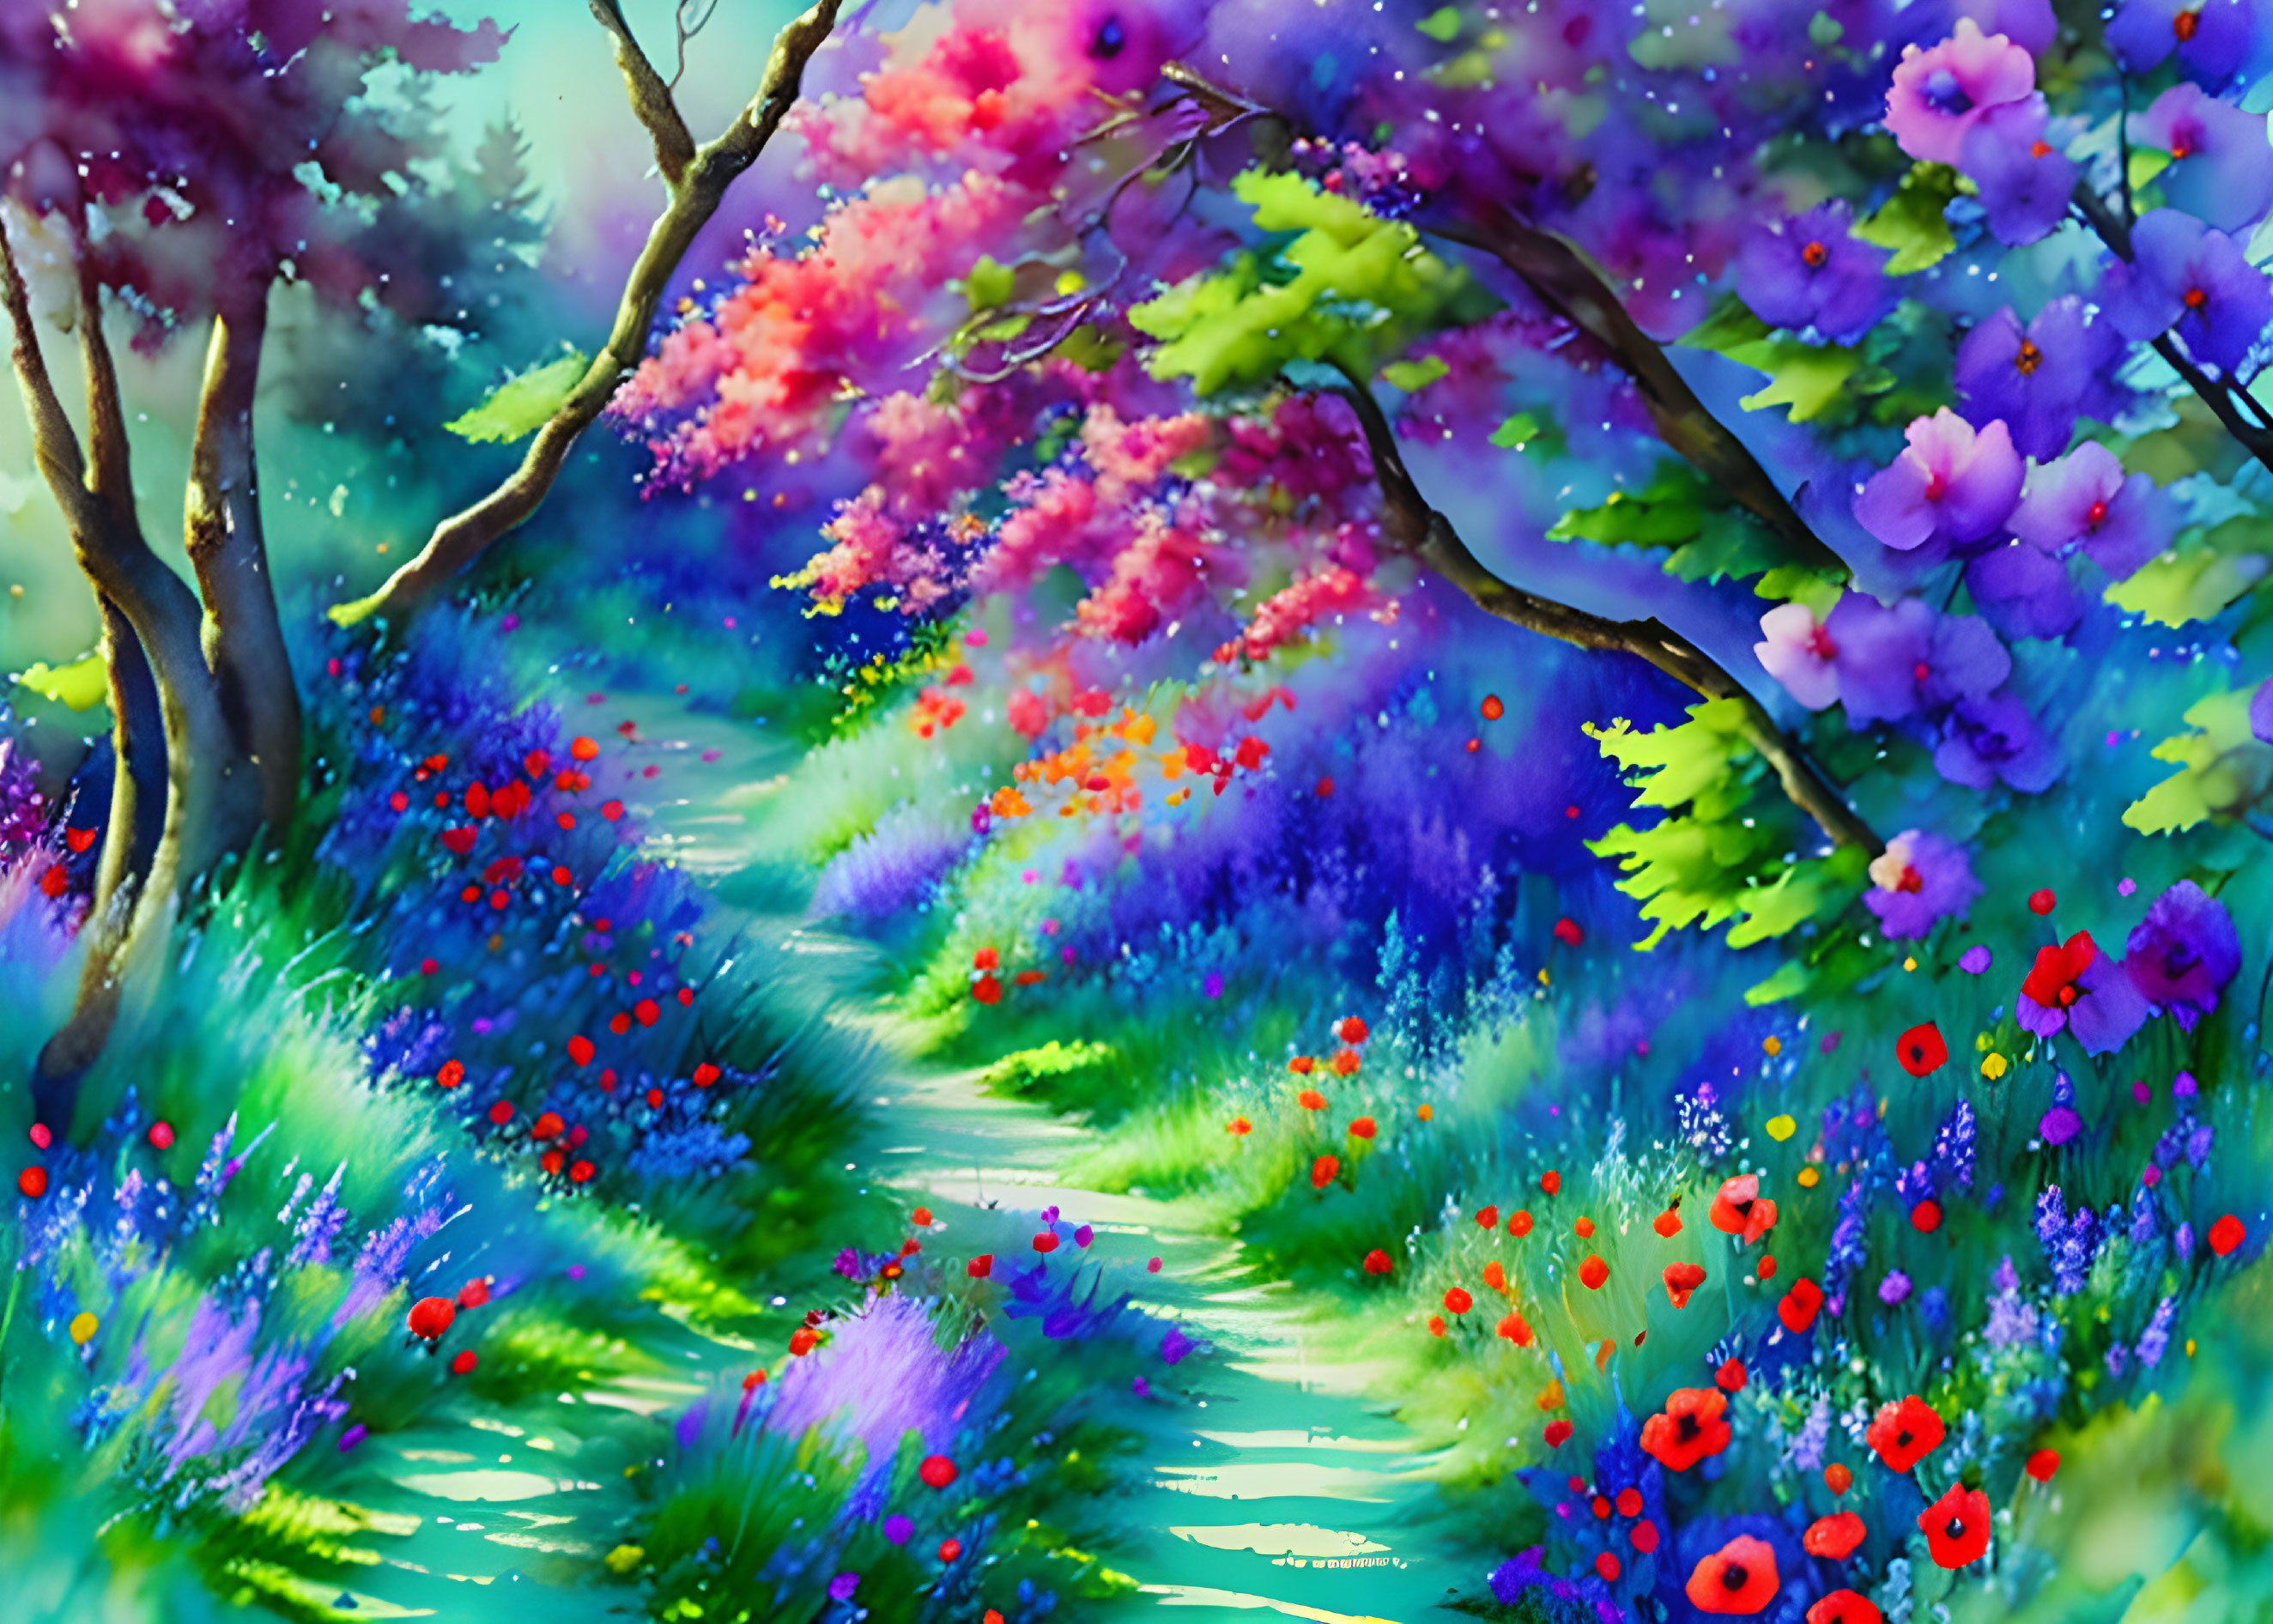 Whimsical forest path watercolor painting with colorful flowers.